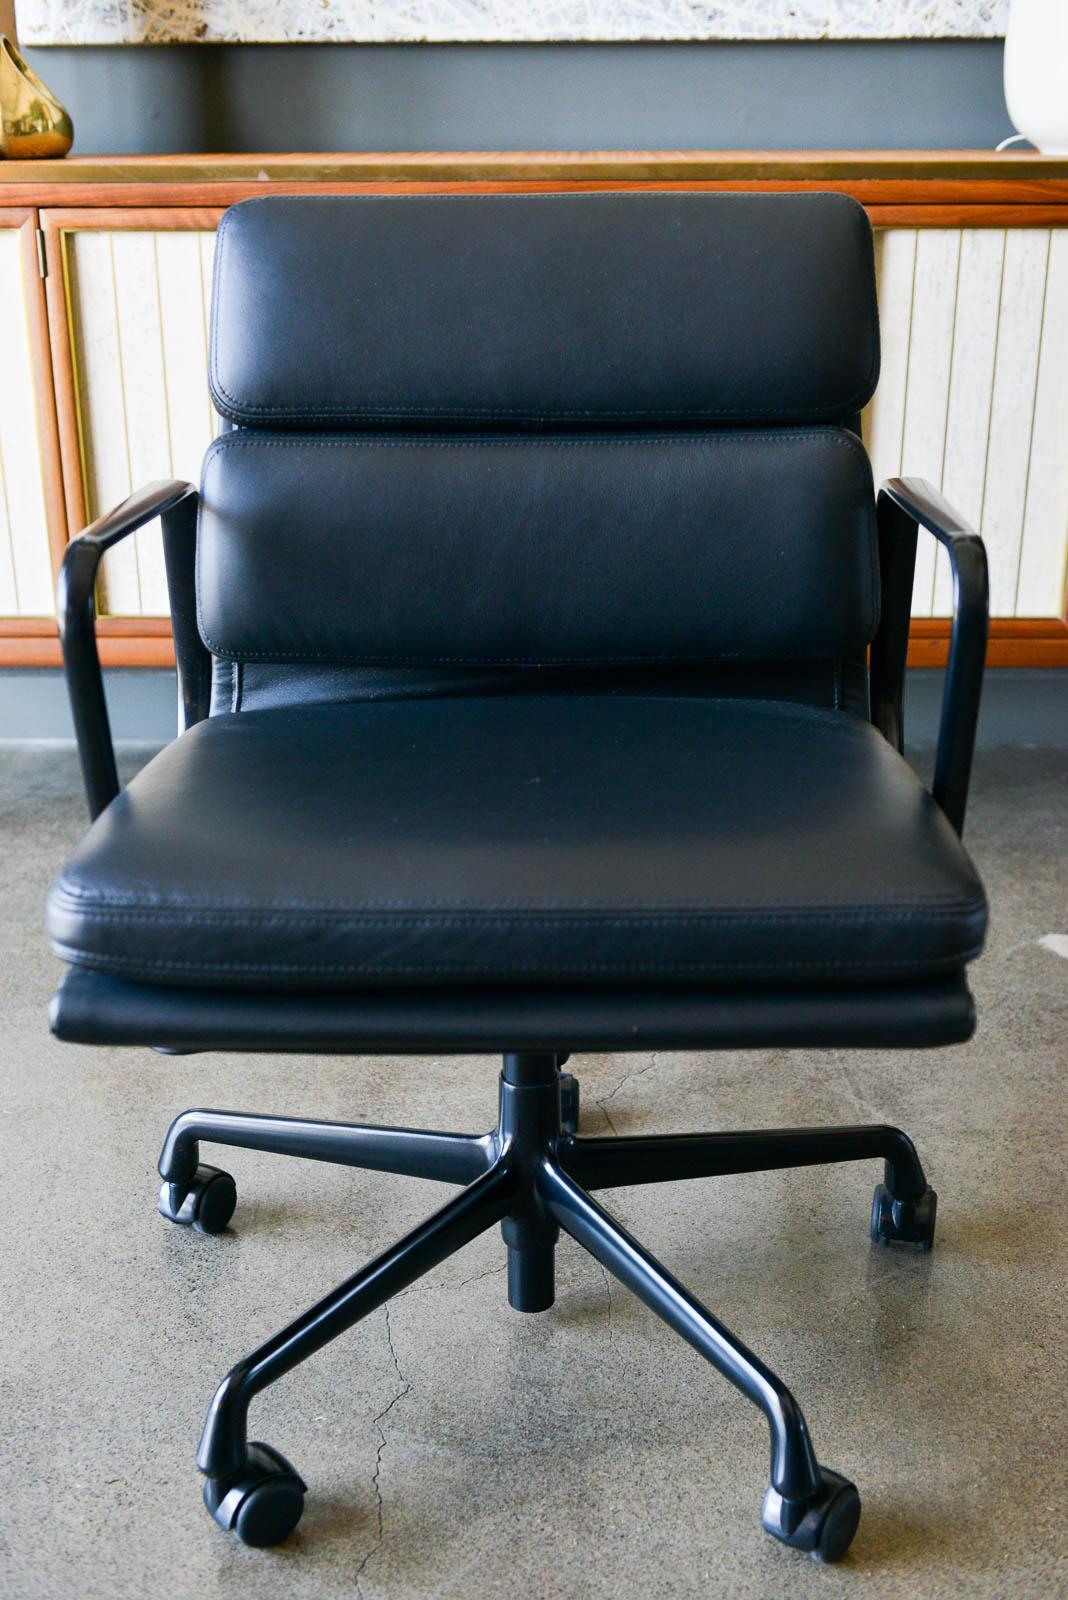 Eames soft pad management chair in black leather. New production, never been used. We have two available with hydraulic controls. Soft black leather with black base and casters.

Measure: 33.75